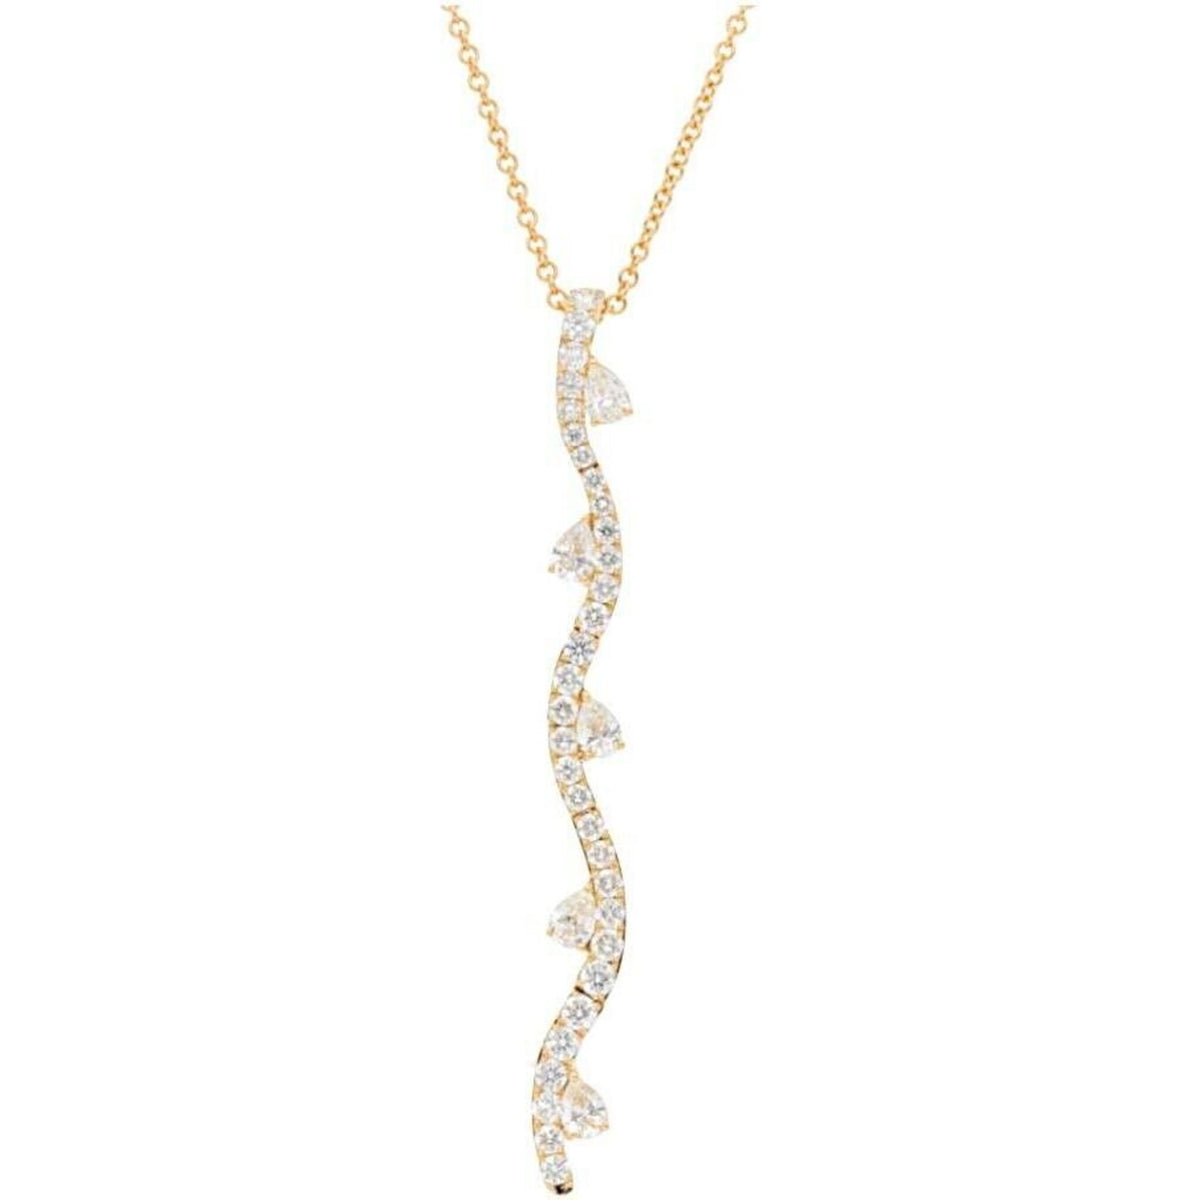 Sofer Jewelry - Wavy Pave Diamond Drop With Pear Diamond Pendant in 14K Yellow Gold